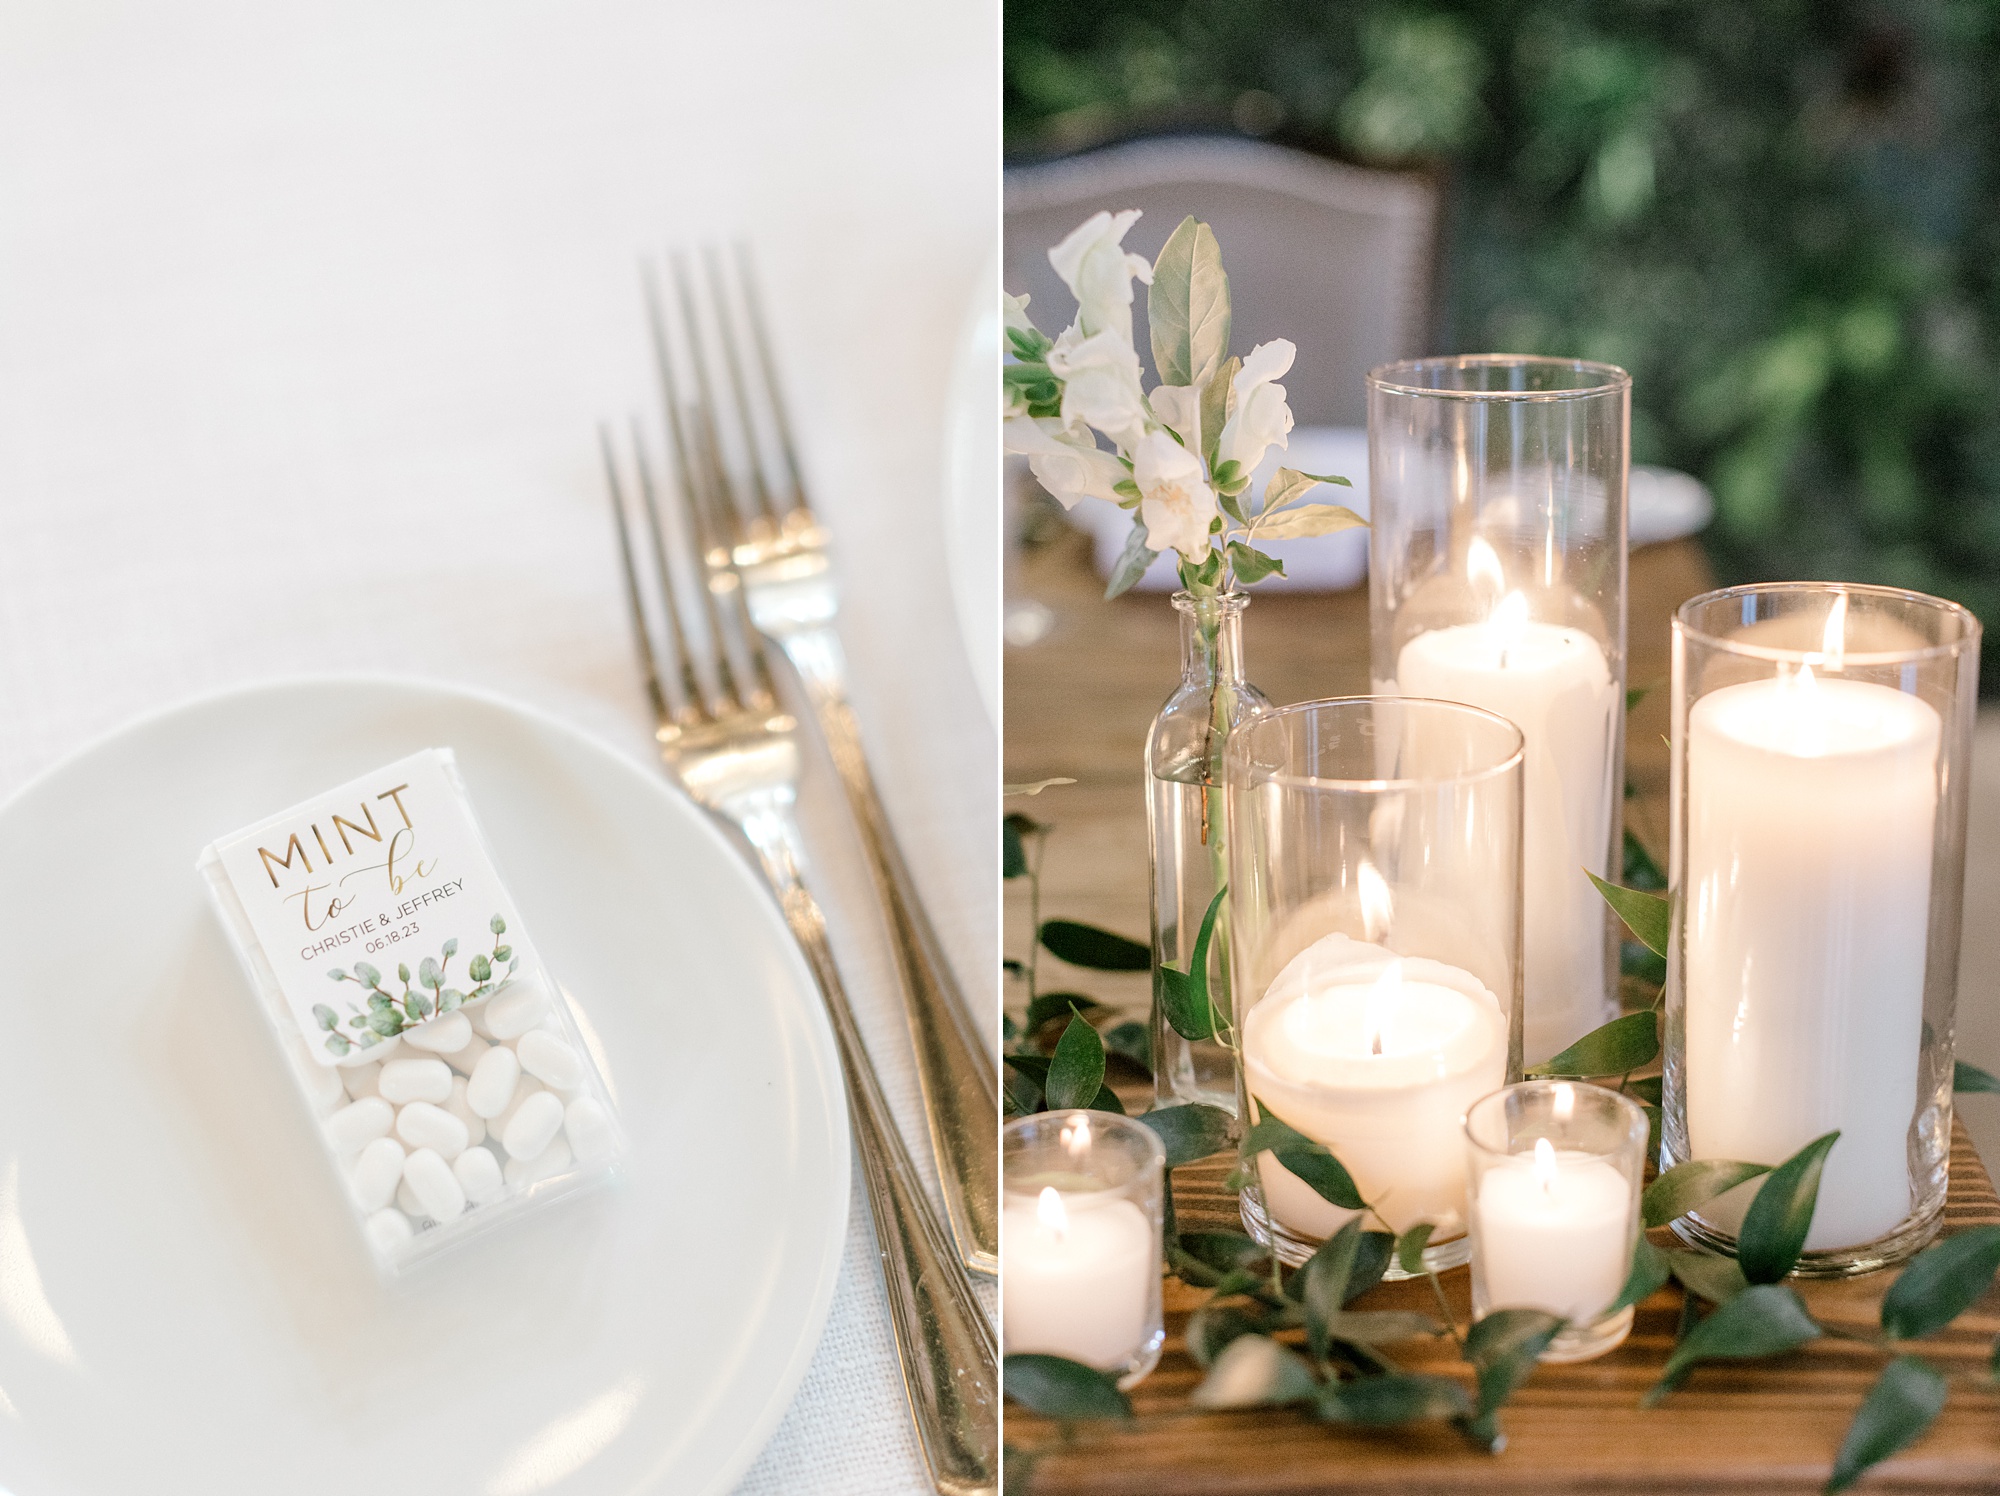 wedding place setting with mint favors